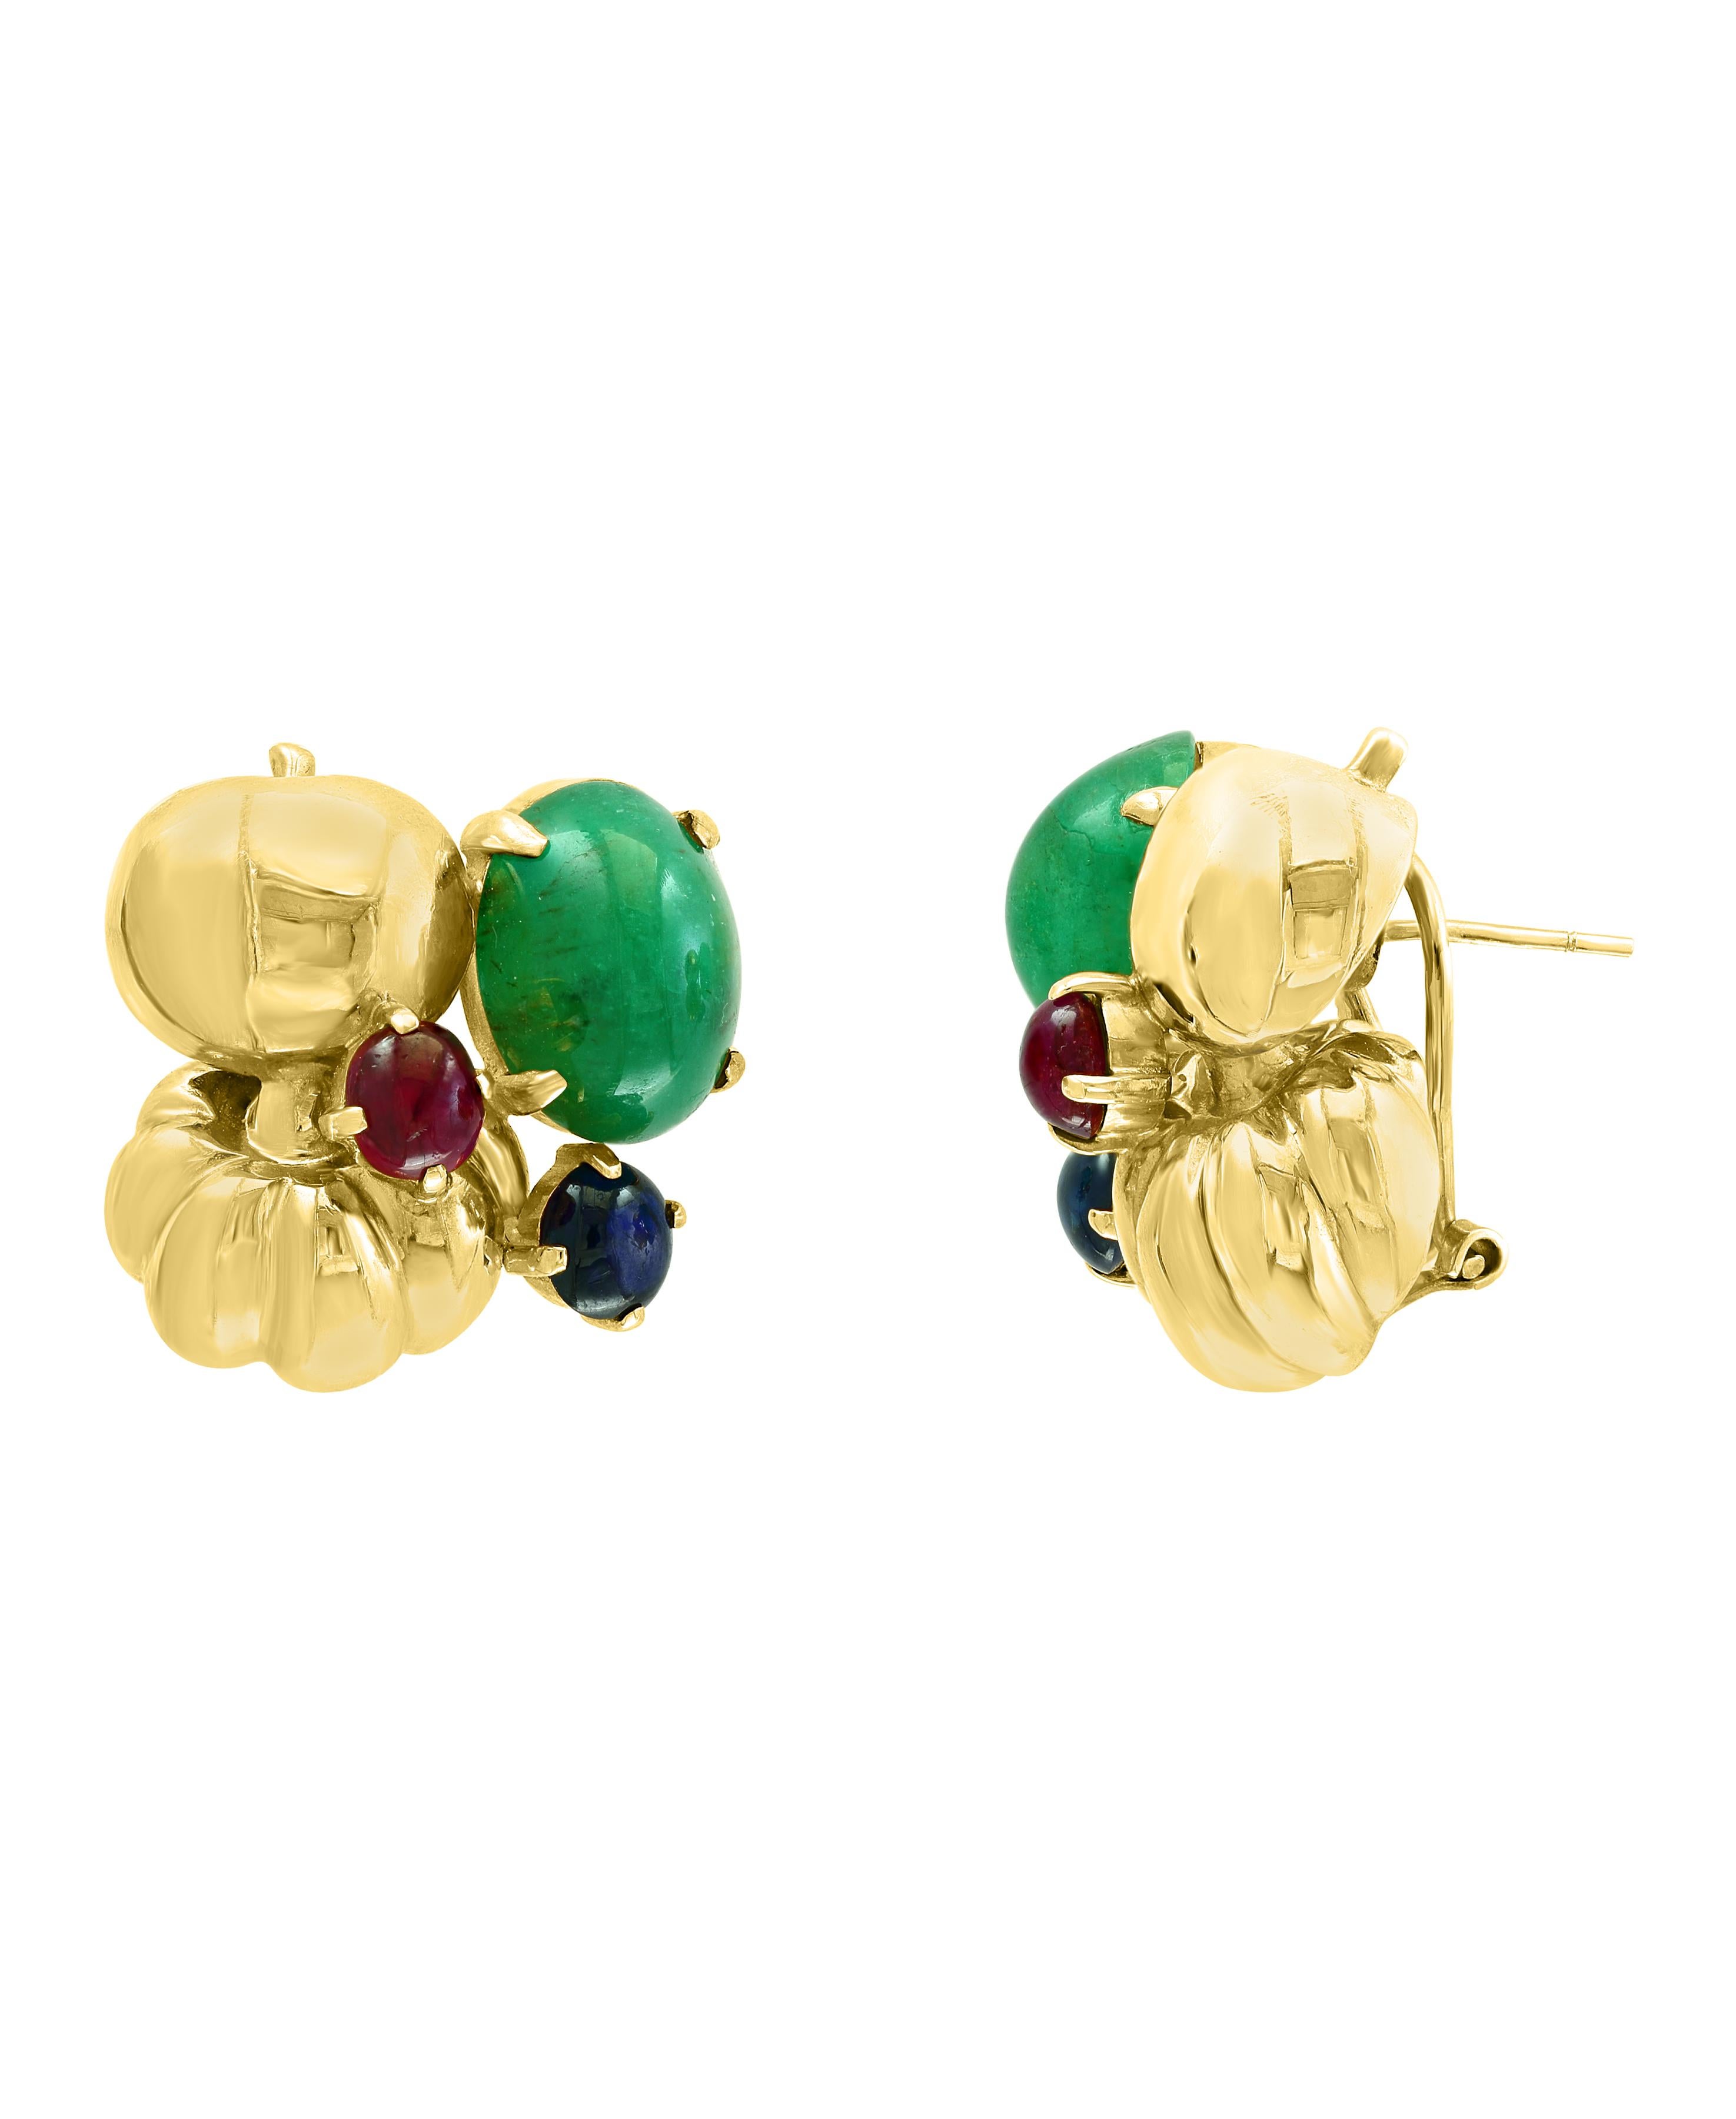 12 Carat  Cabochon Emerald Diamond Clip Earrings 14 Karat Yellow Gold, Estate
This exquisite pair of earrings are beautifully crafted with 14 karat Yellow gold  weighing   22 grams
Two  Emerald  Cabochon weighing approximately 12 carats with no